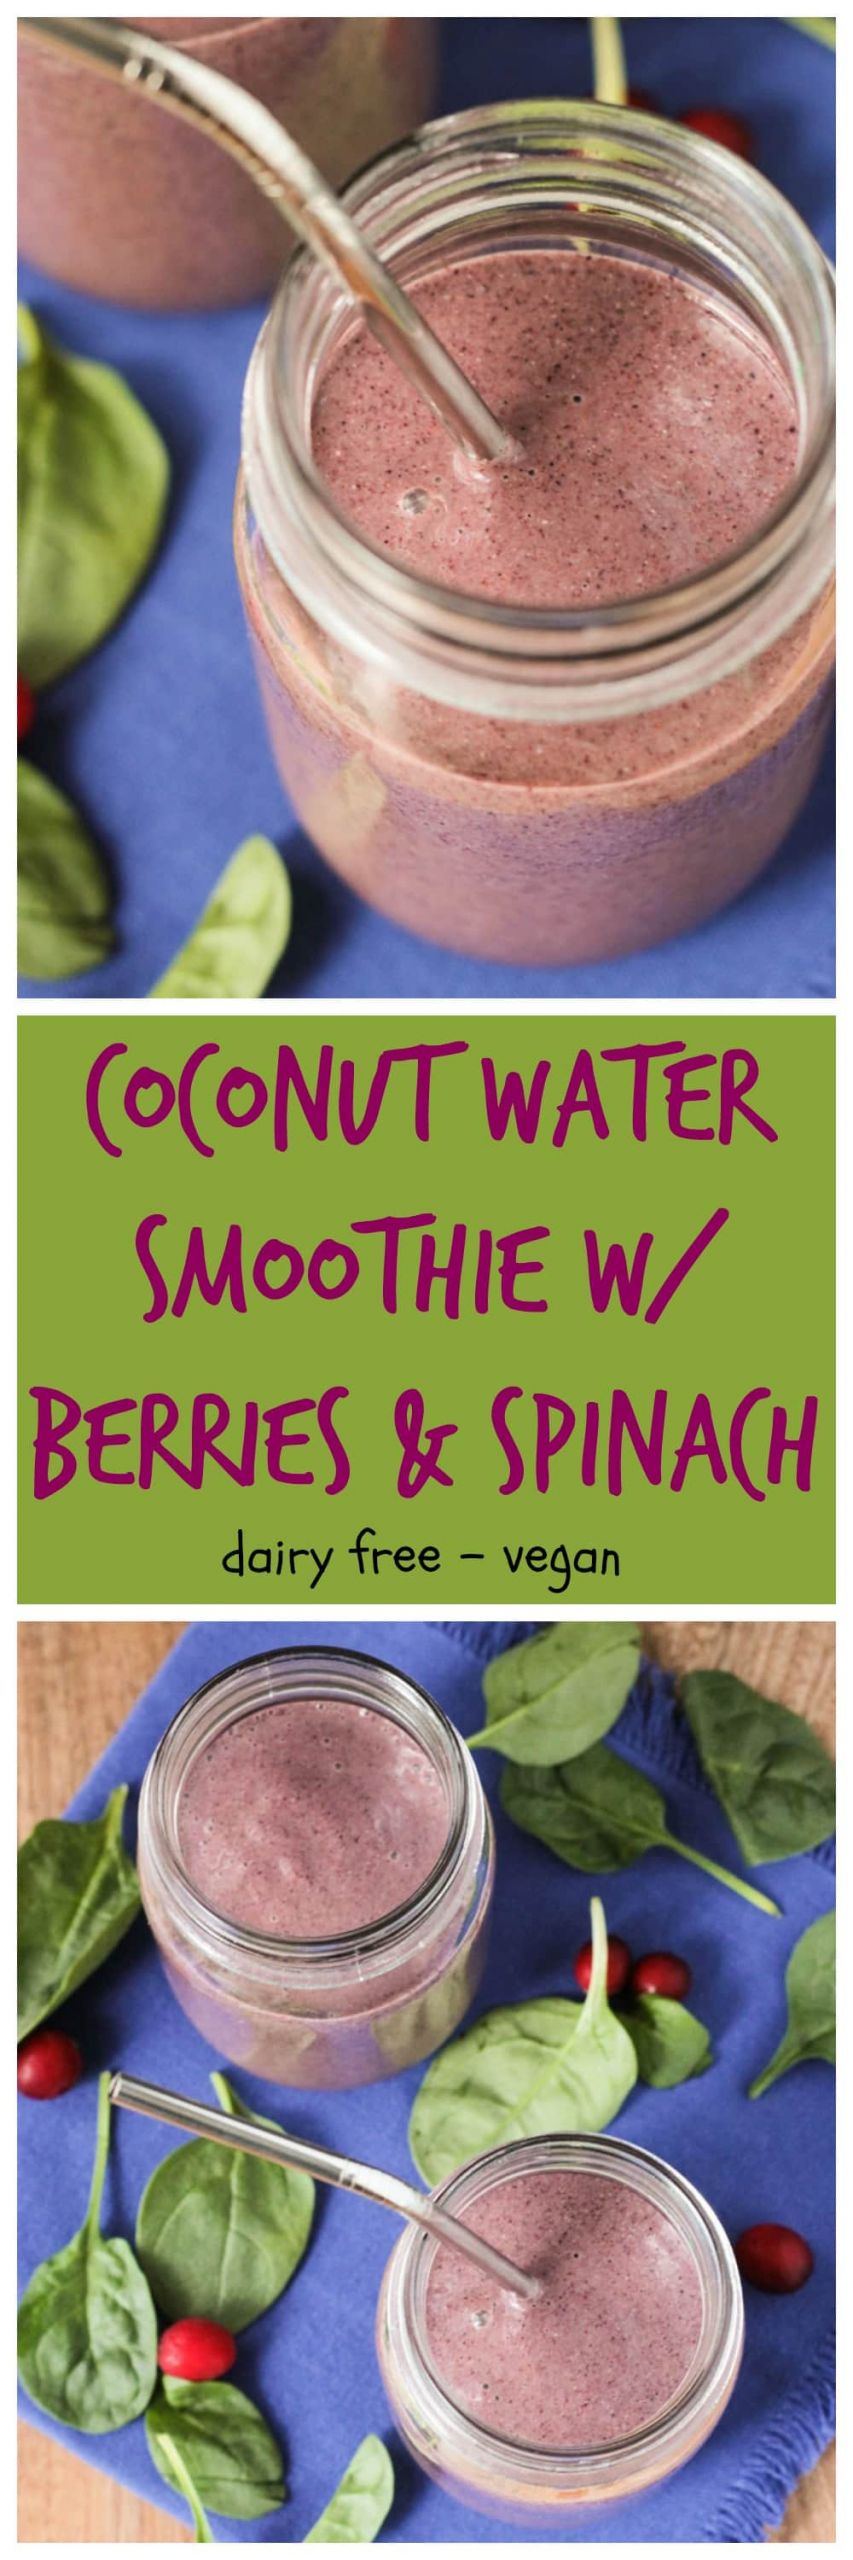 Smoothies With Coconut Water
 Coconut Water Smoothie with Berries and Spinach Veggie